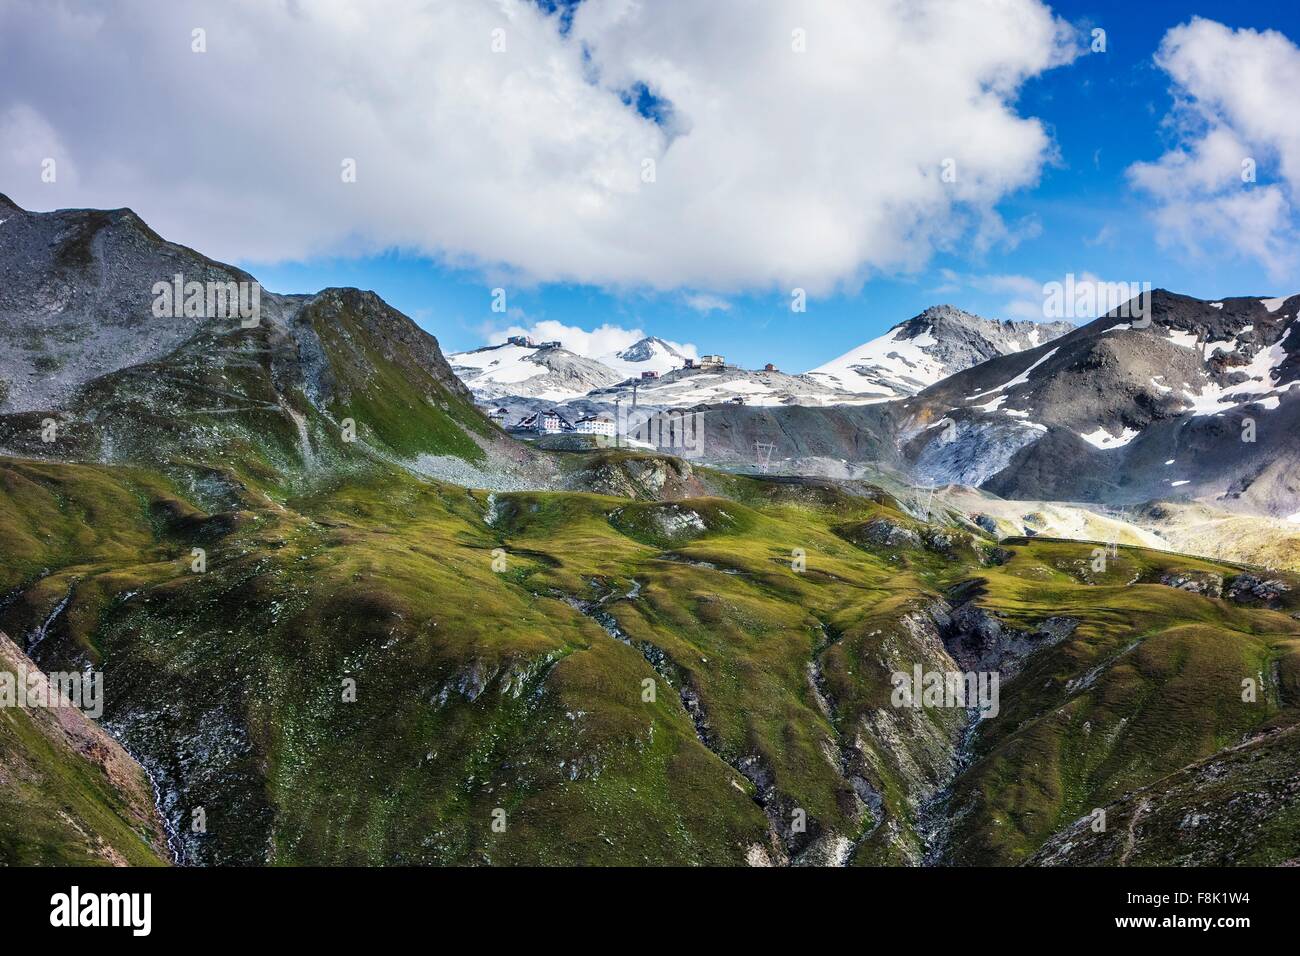 Elevated view of rugged mountains, Stelvio, Italy Stock Photo